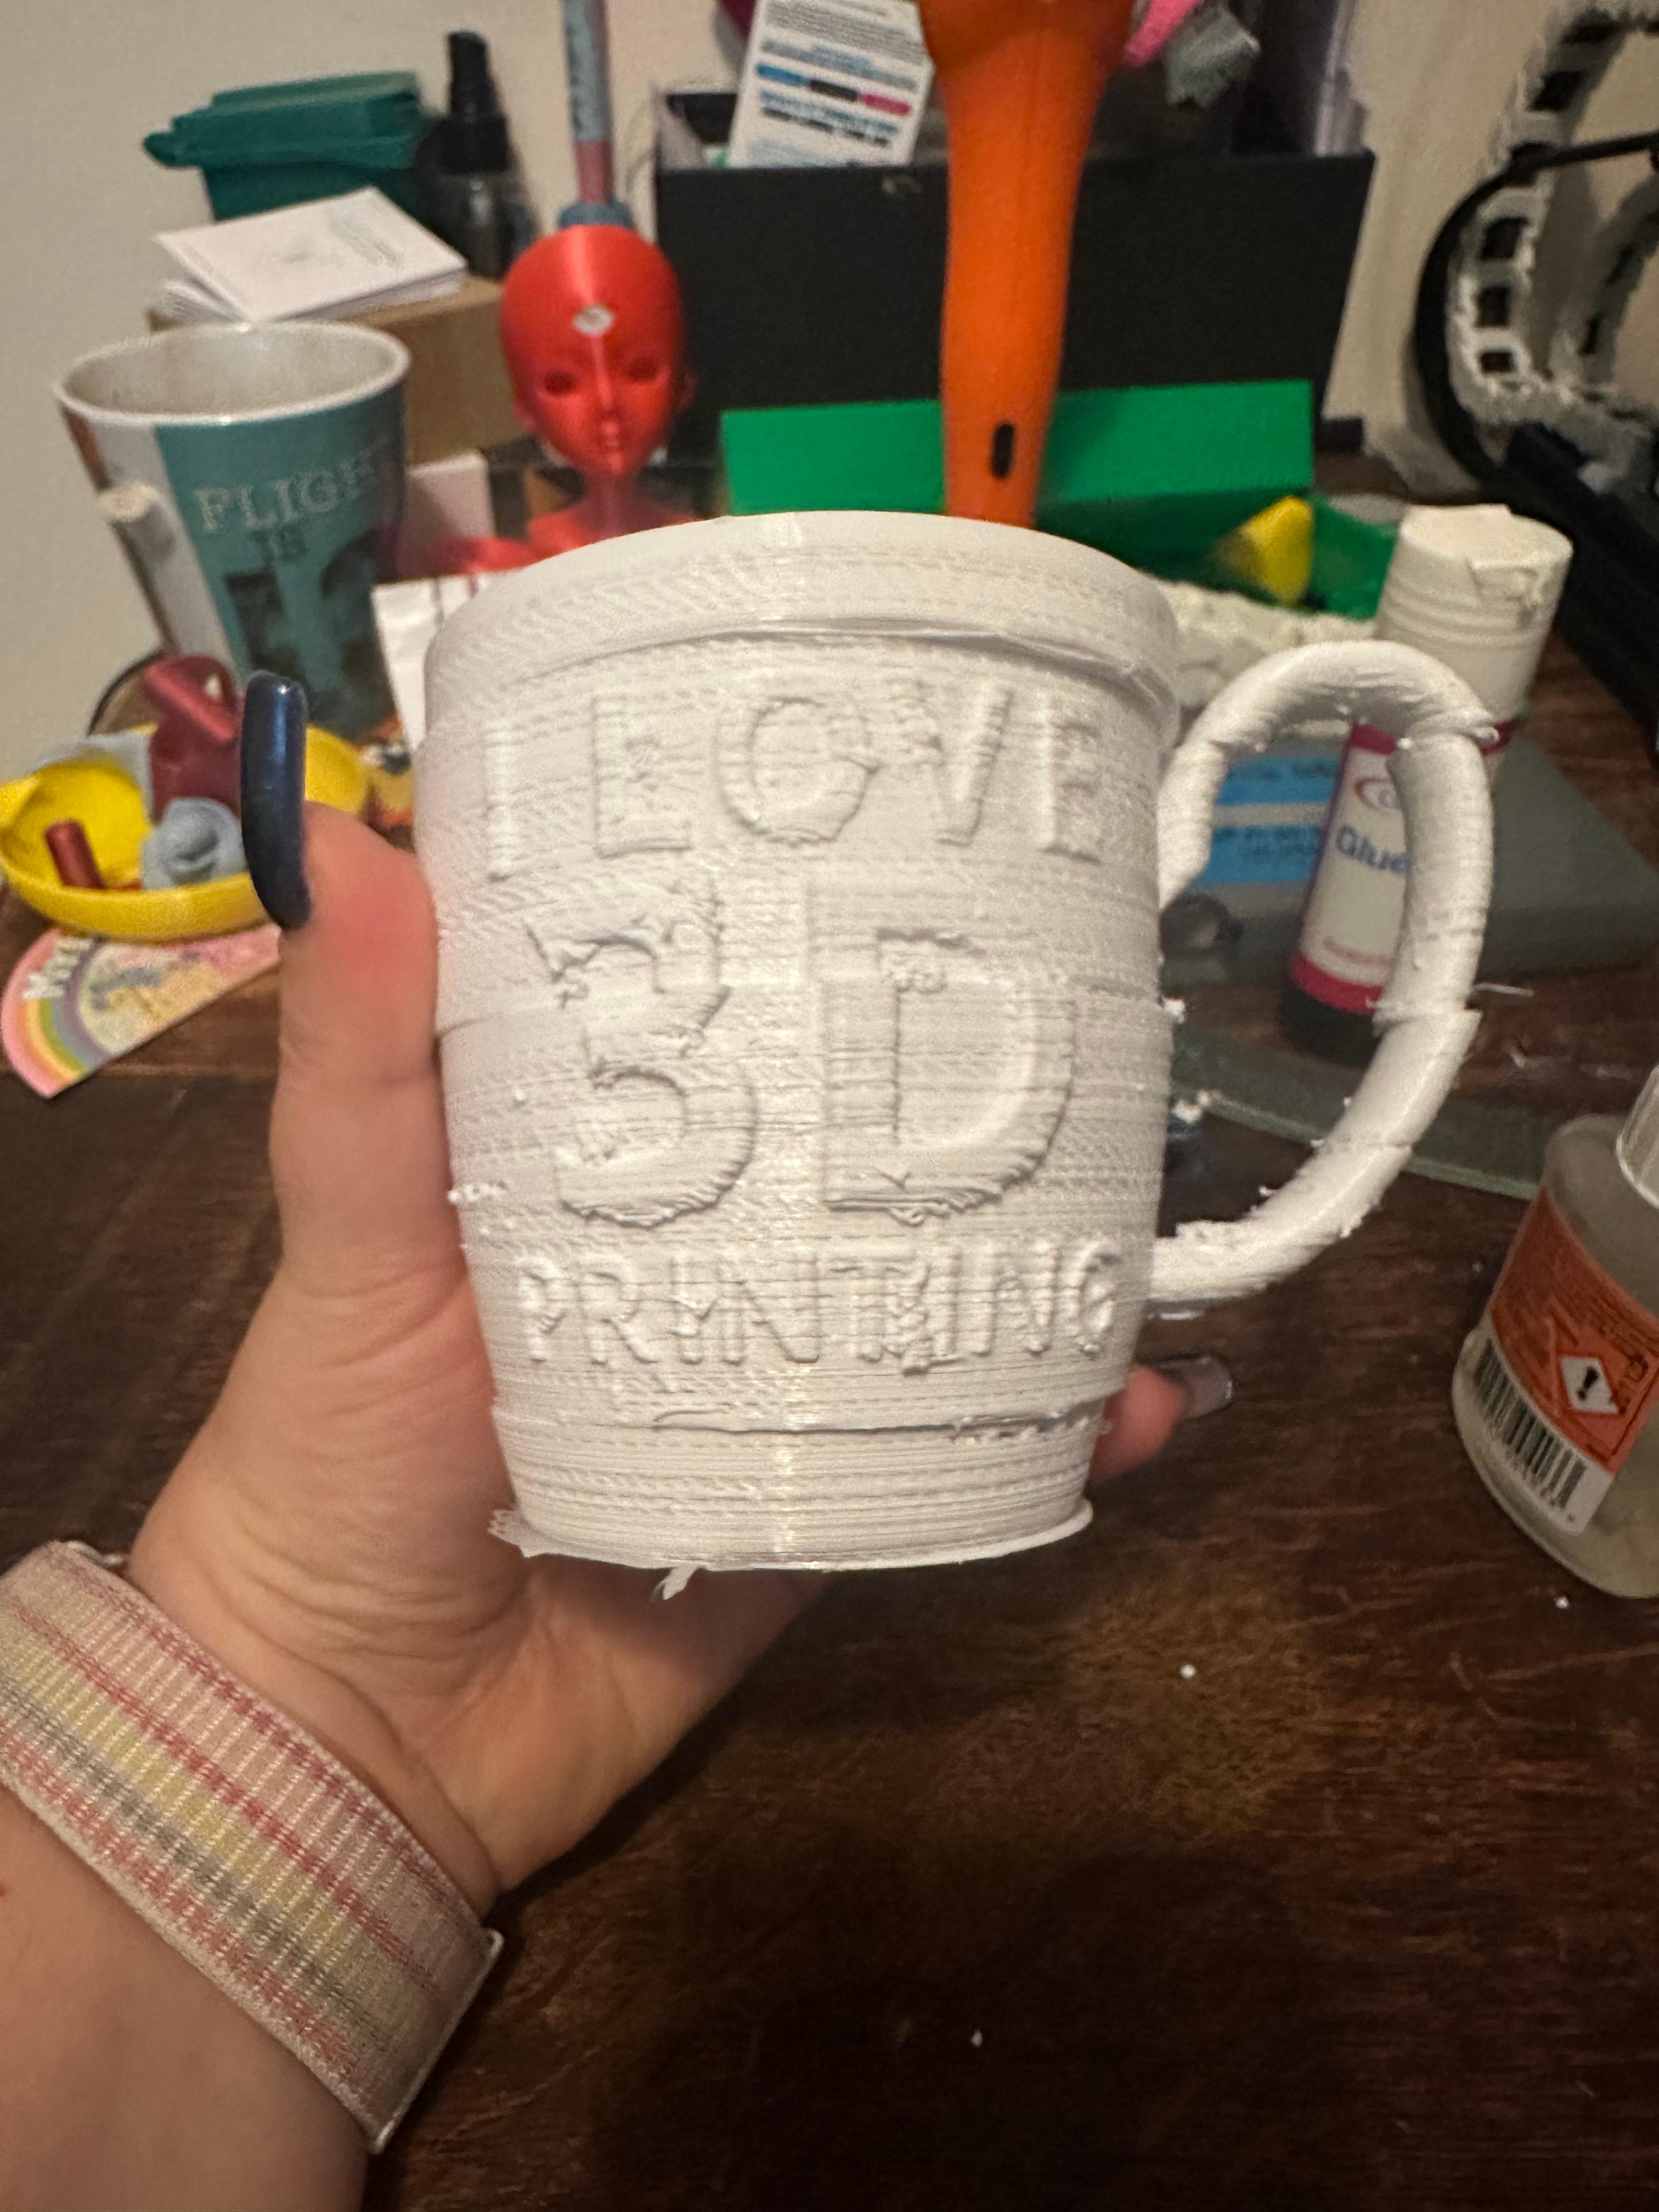 I Love 3D Printing Gag Gift Mug - Purposely made while my printer was being an ***, I love it! - 3d model